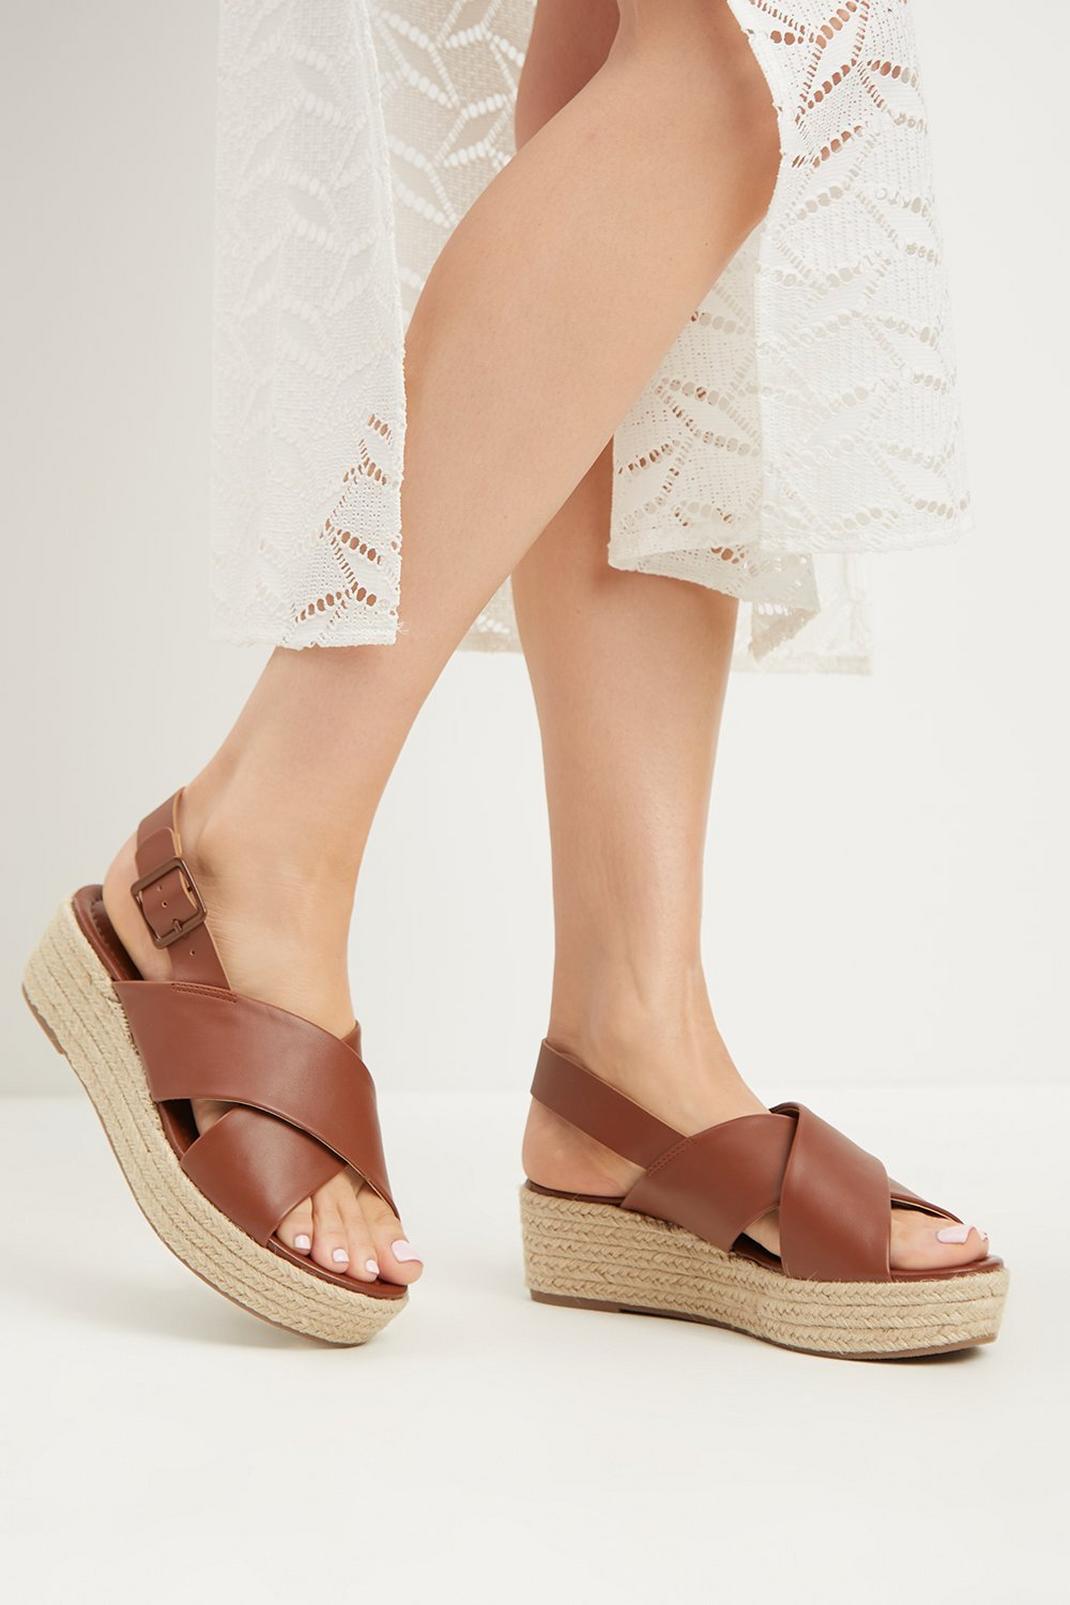 Cocoa Reagan Cross Strap Wedge image number 1